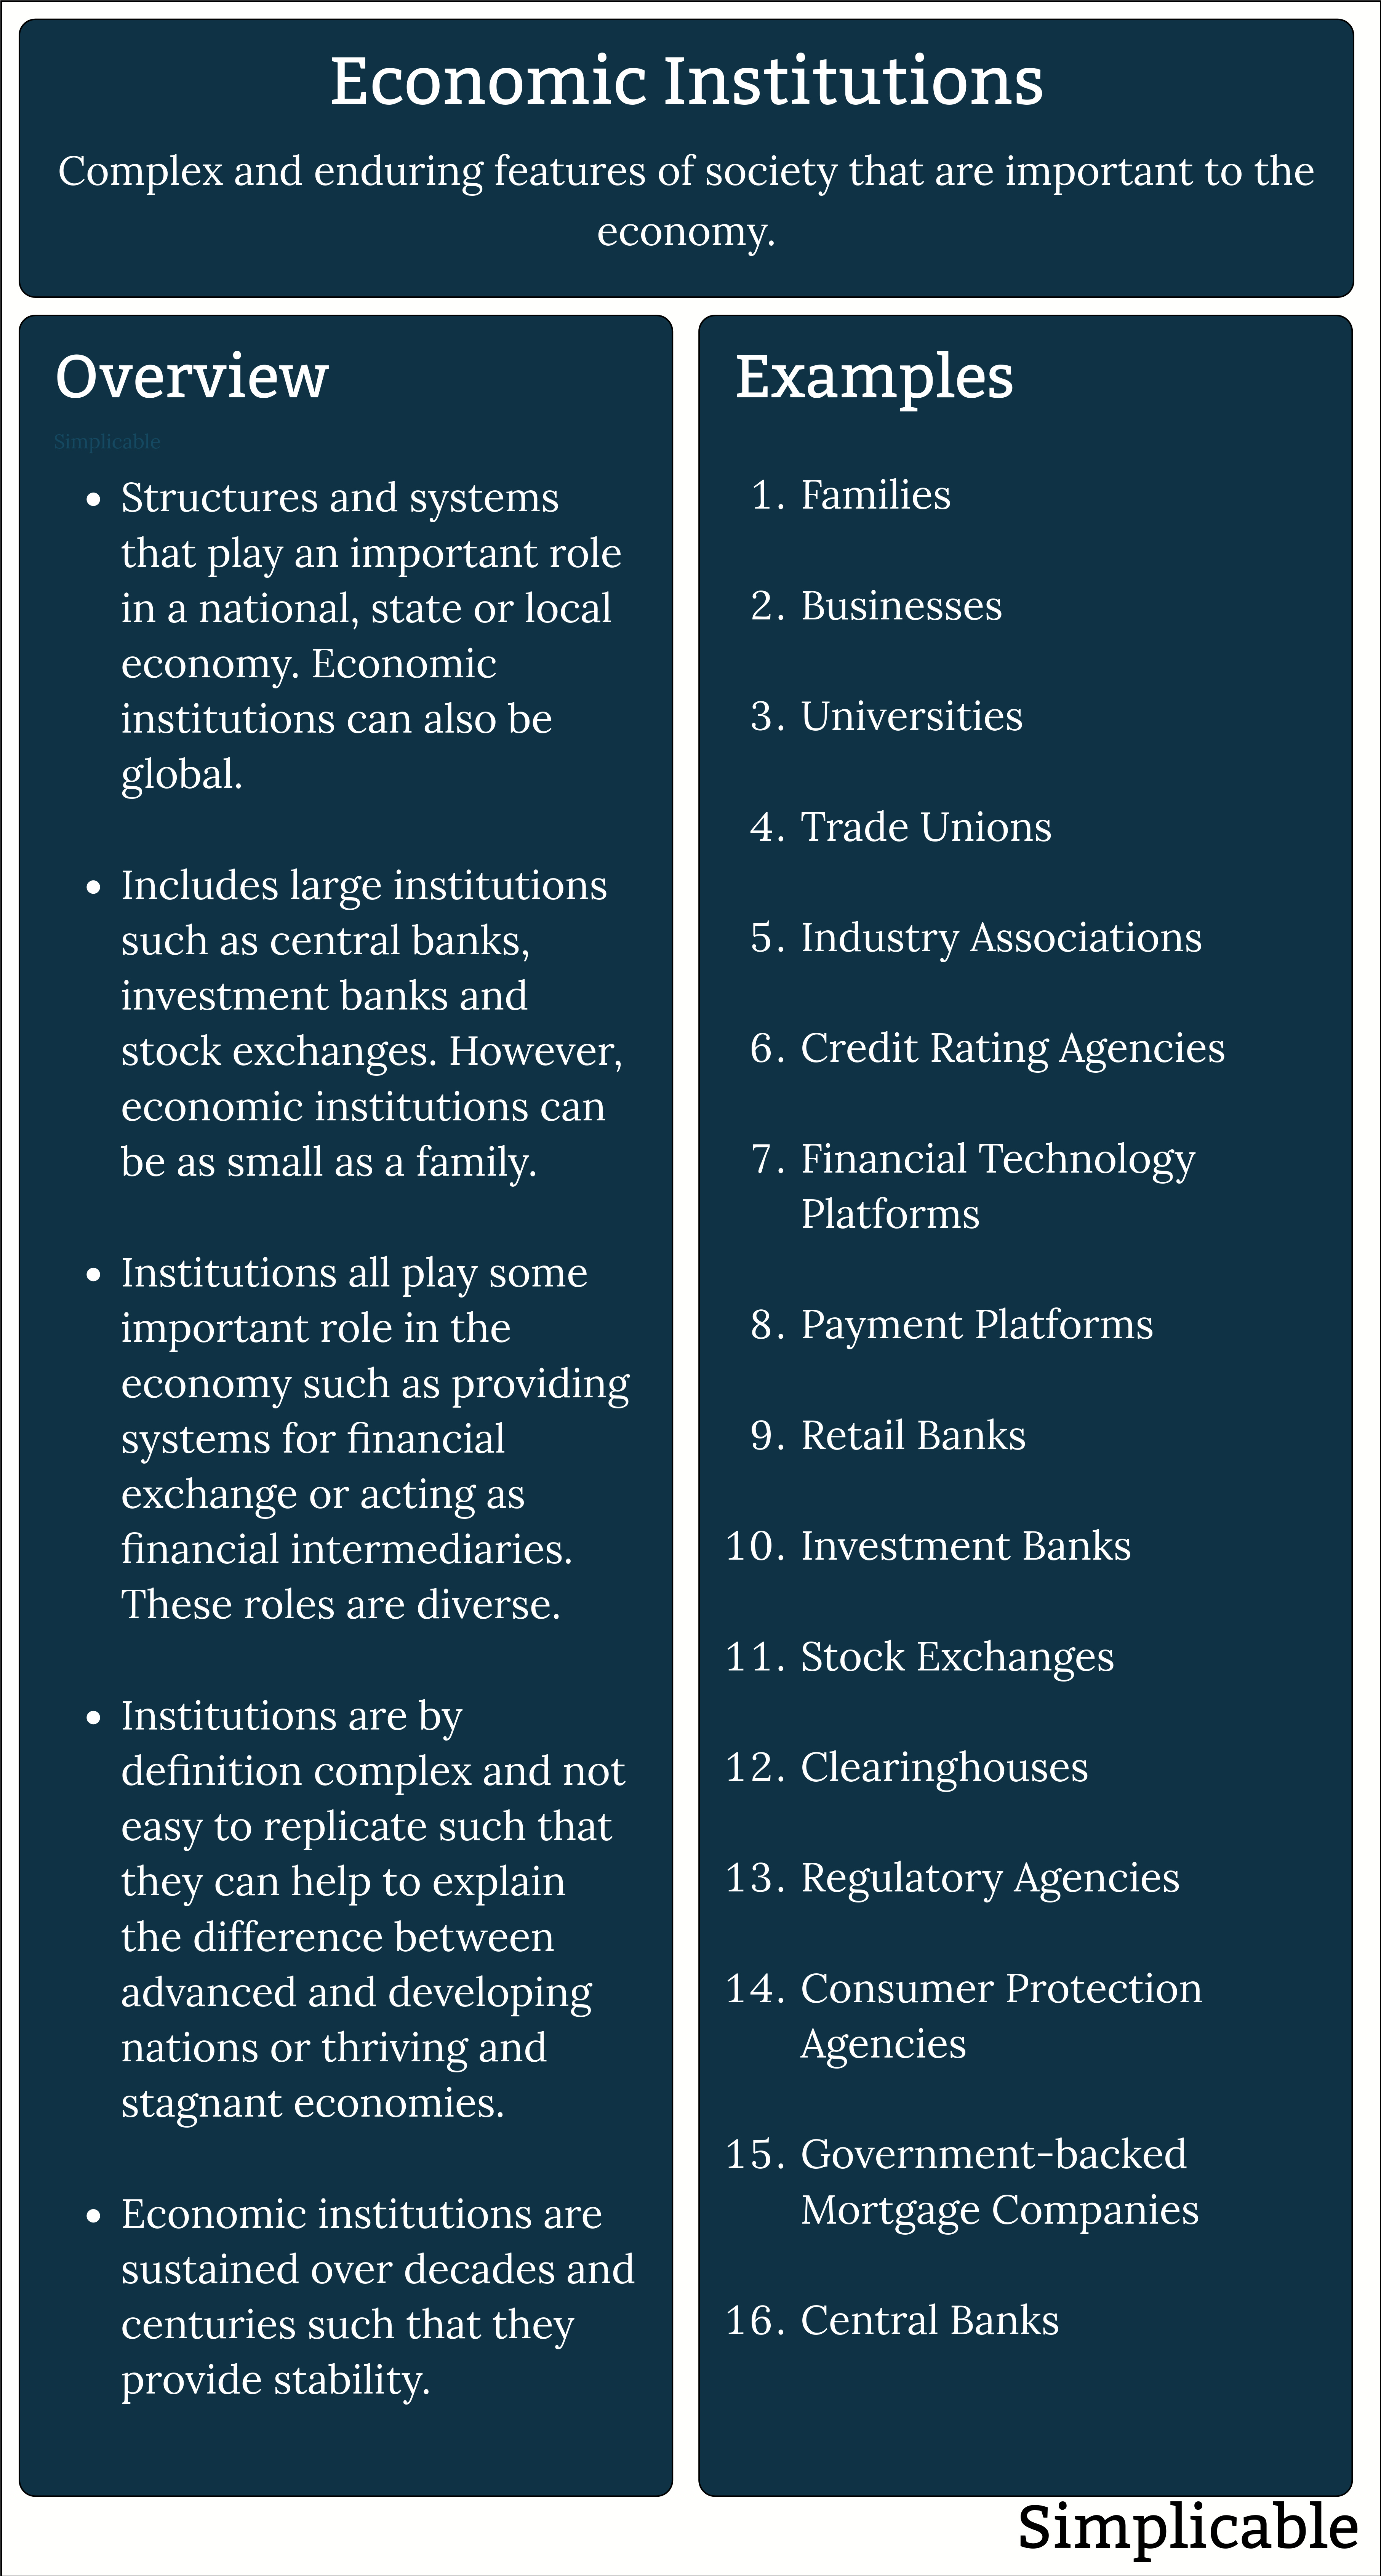 economic institutions overview and examples